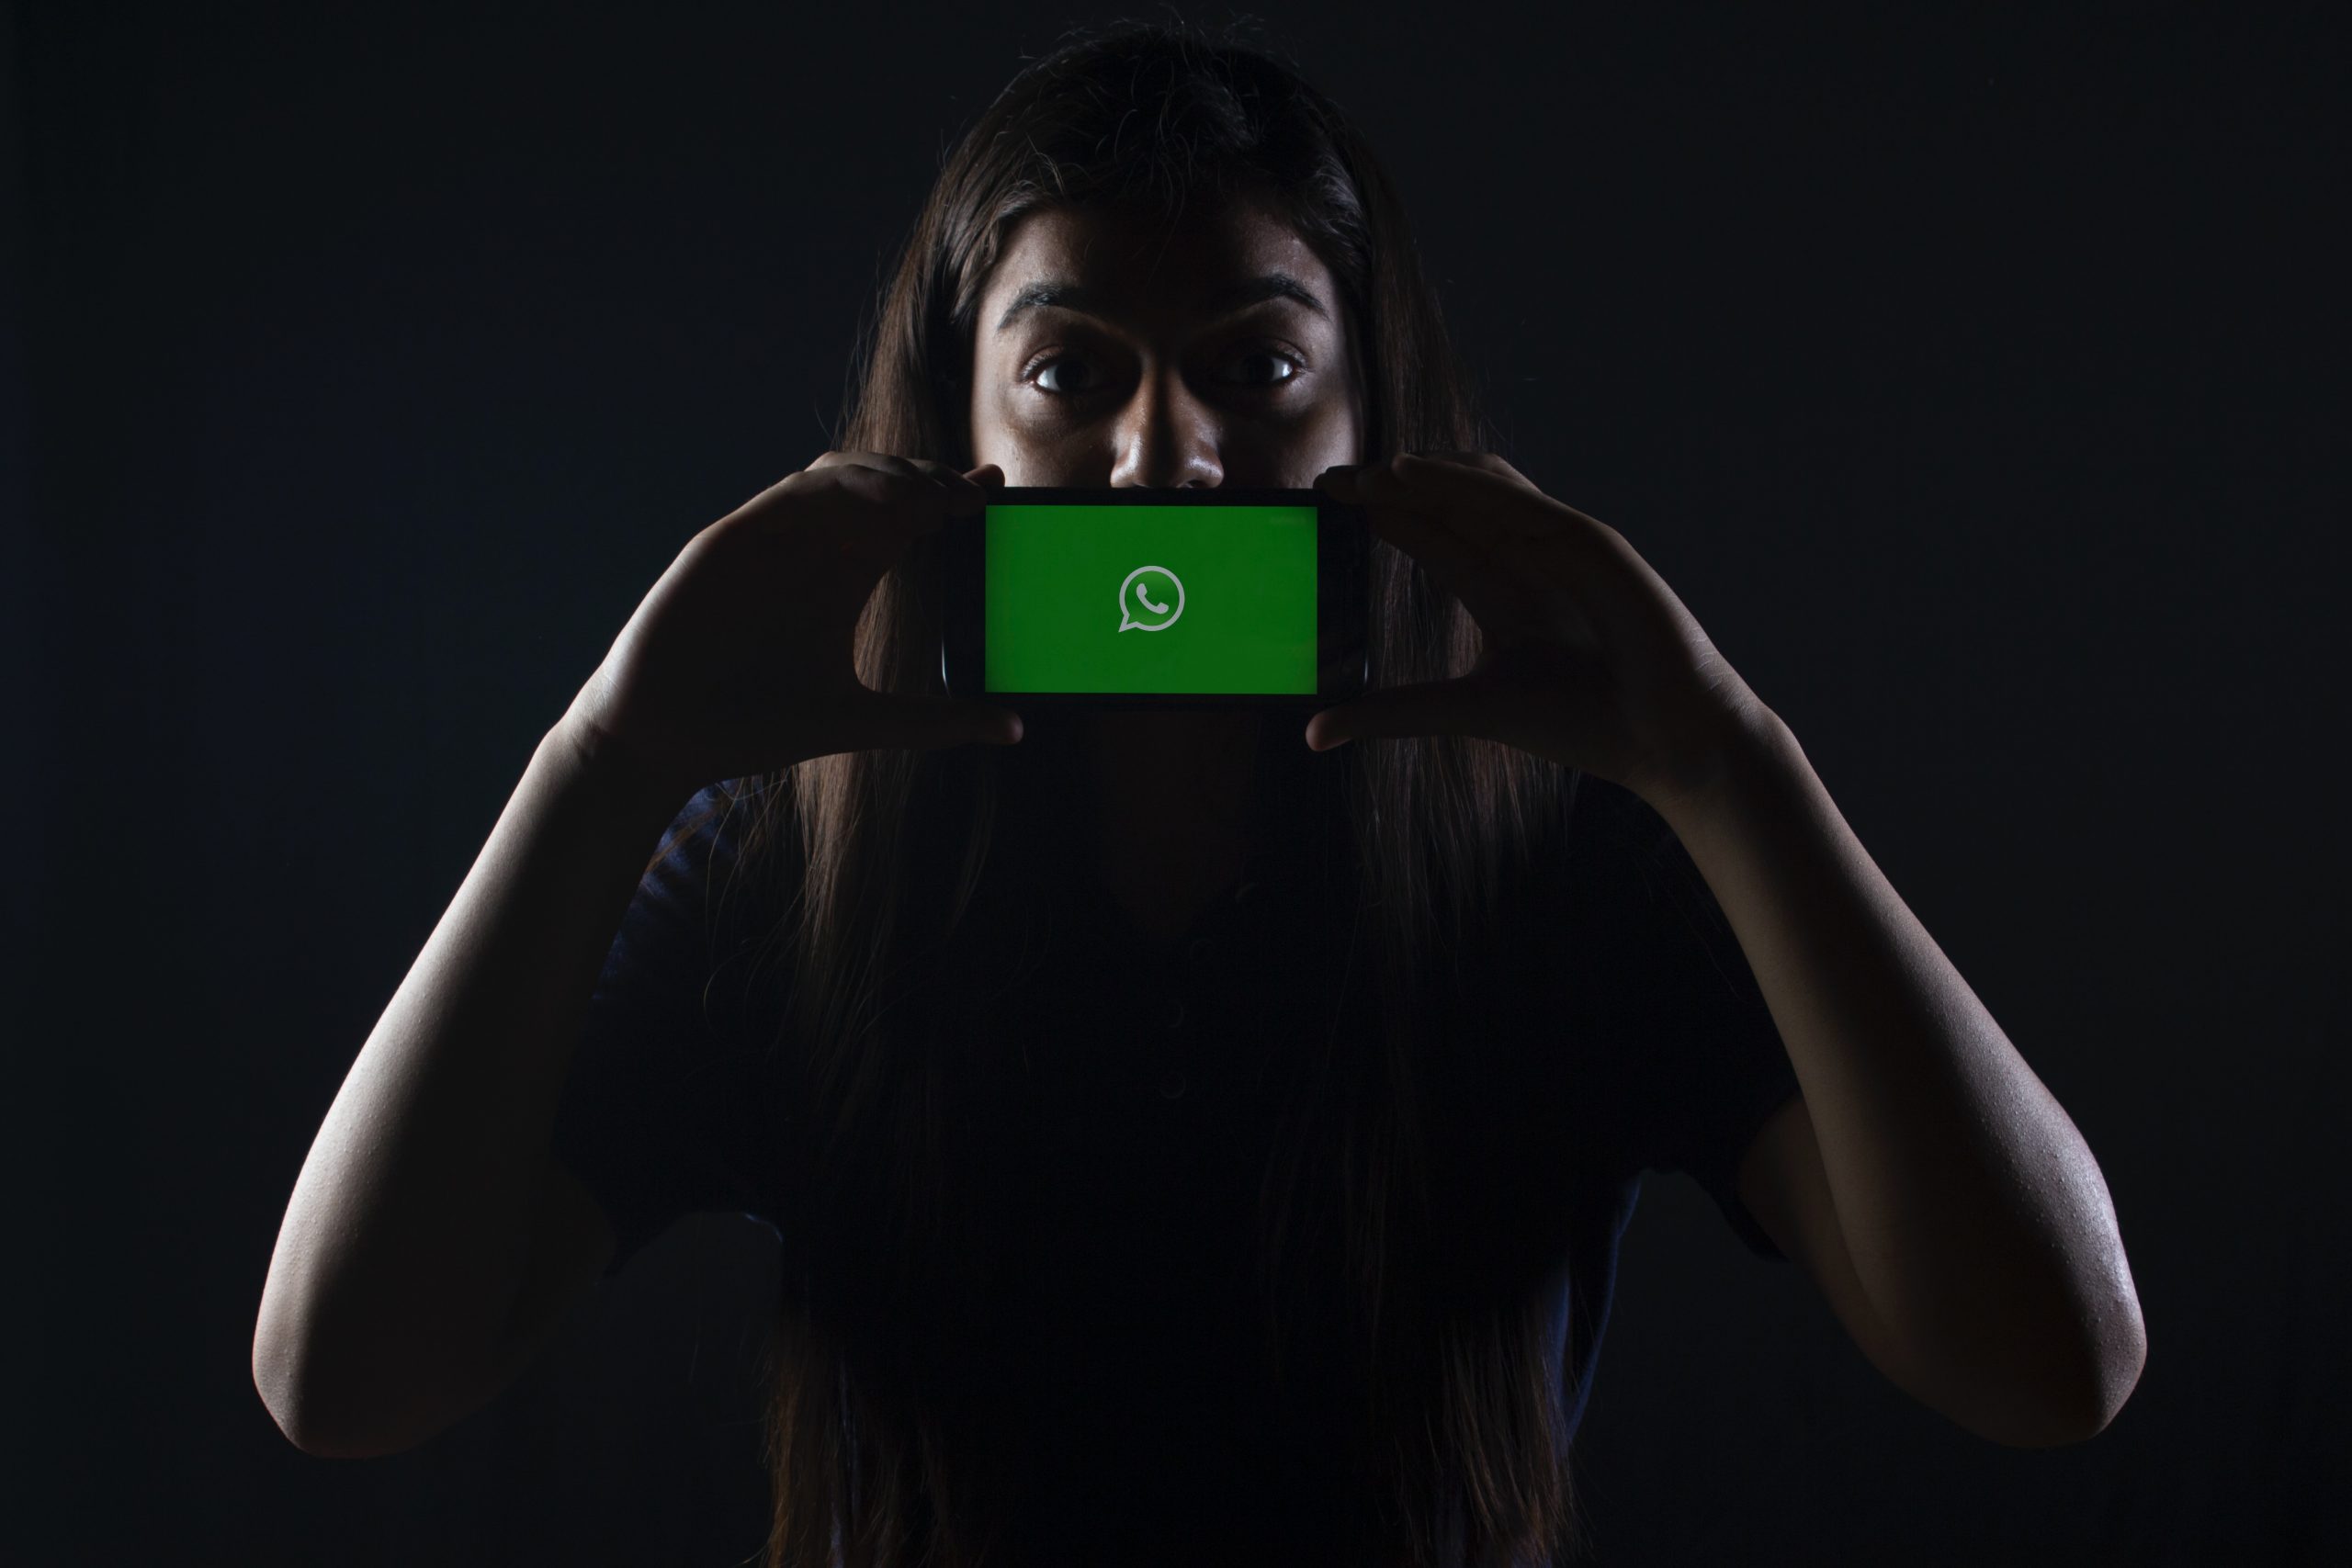 How To Know Your WhatsApp Account Has Been Hacked And Tips To Prevent It